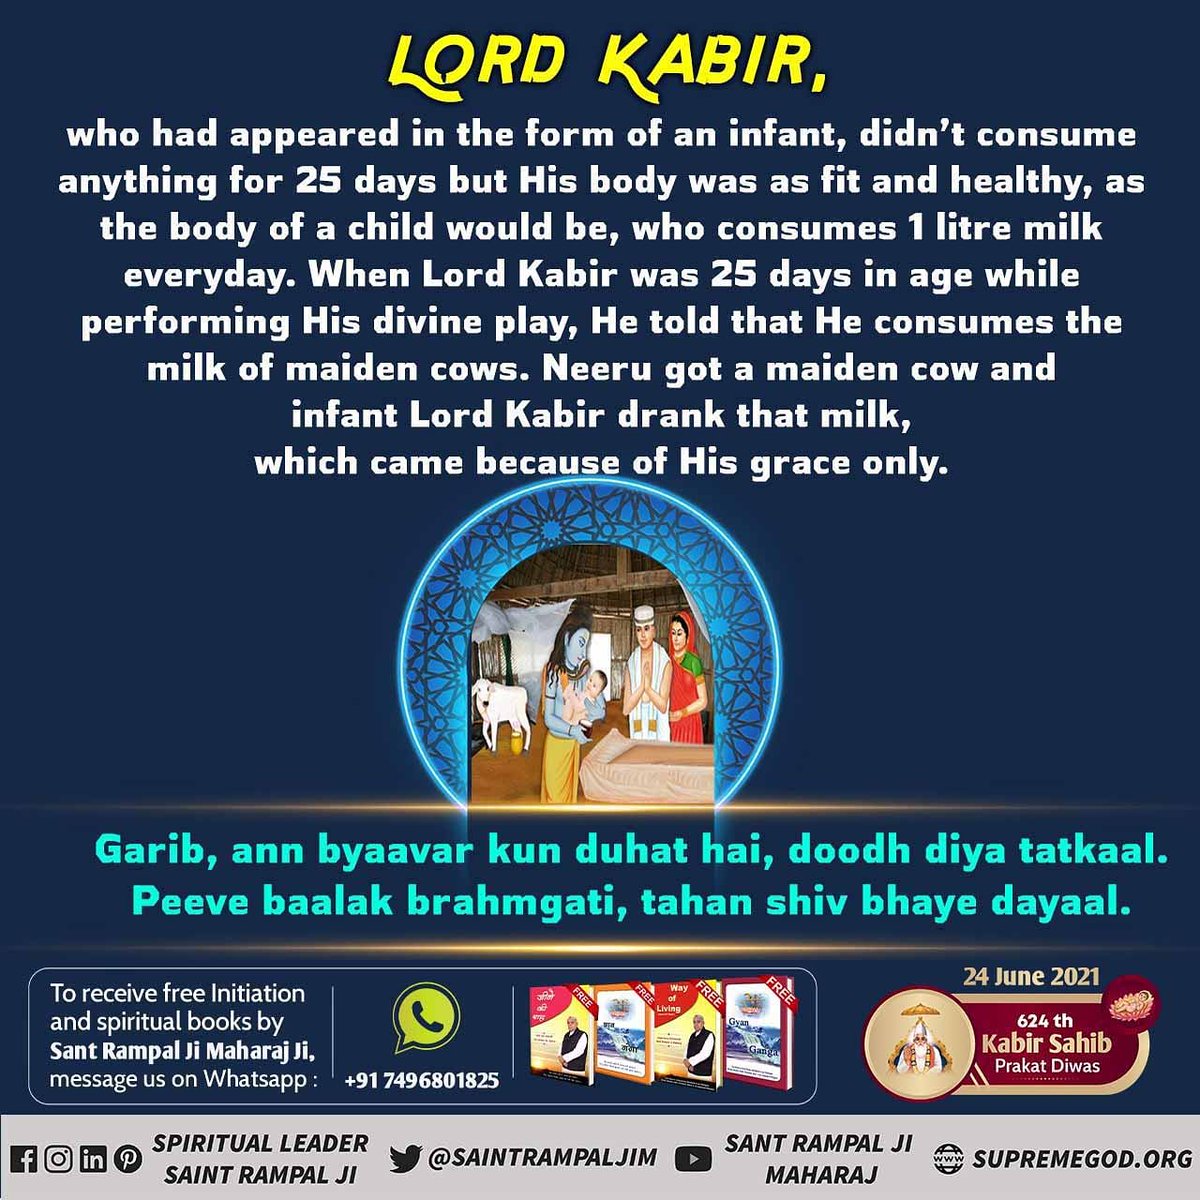 #624वां_कबीरसाहेब_प्रकट दिवस Only God Kabir can save the whole earth. He is the creator of the universe. He is our real protector. We should worship to him and tie the raksha sutra of Ram nam. #संतरामपालजीमहाराज @SaintRampalJiM